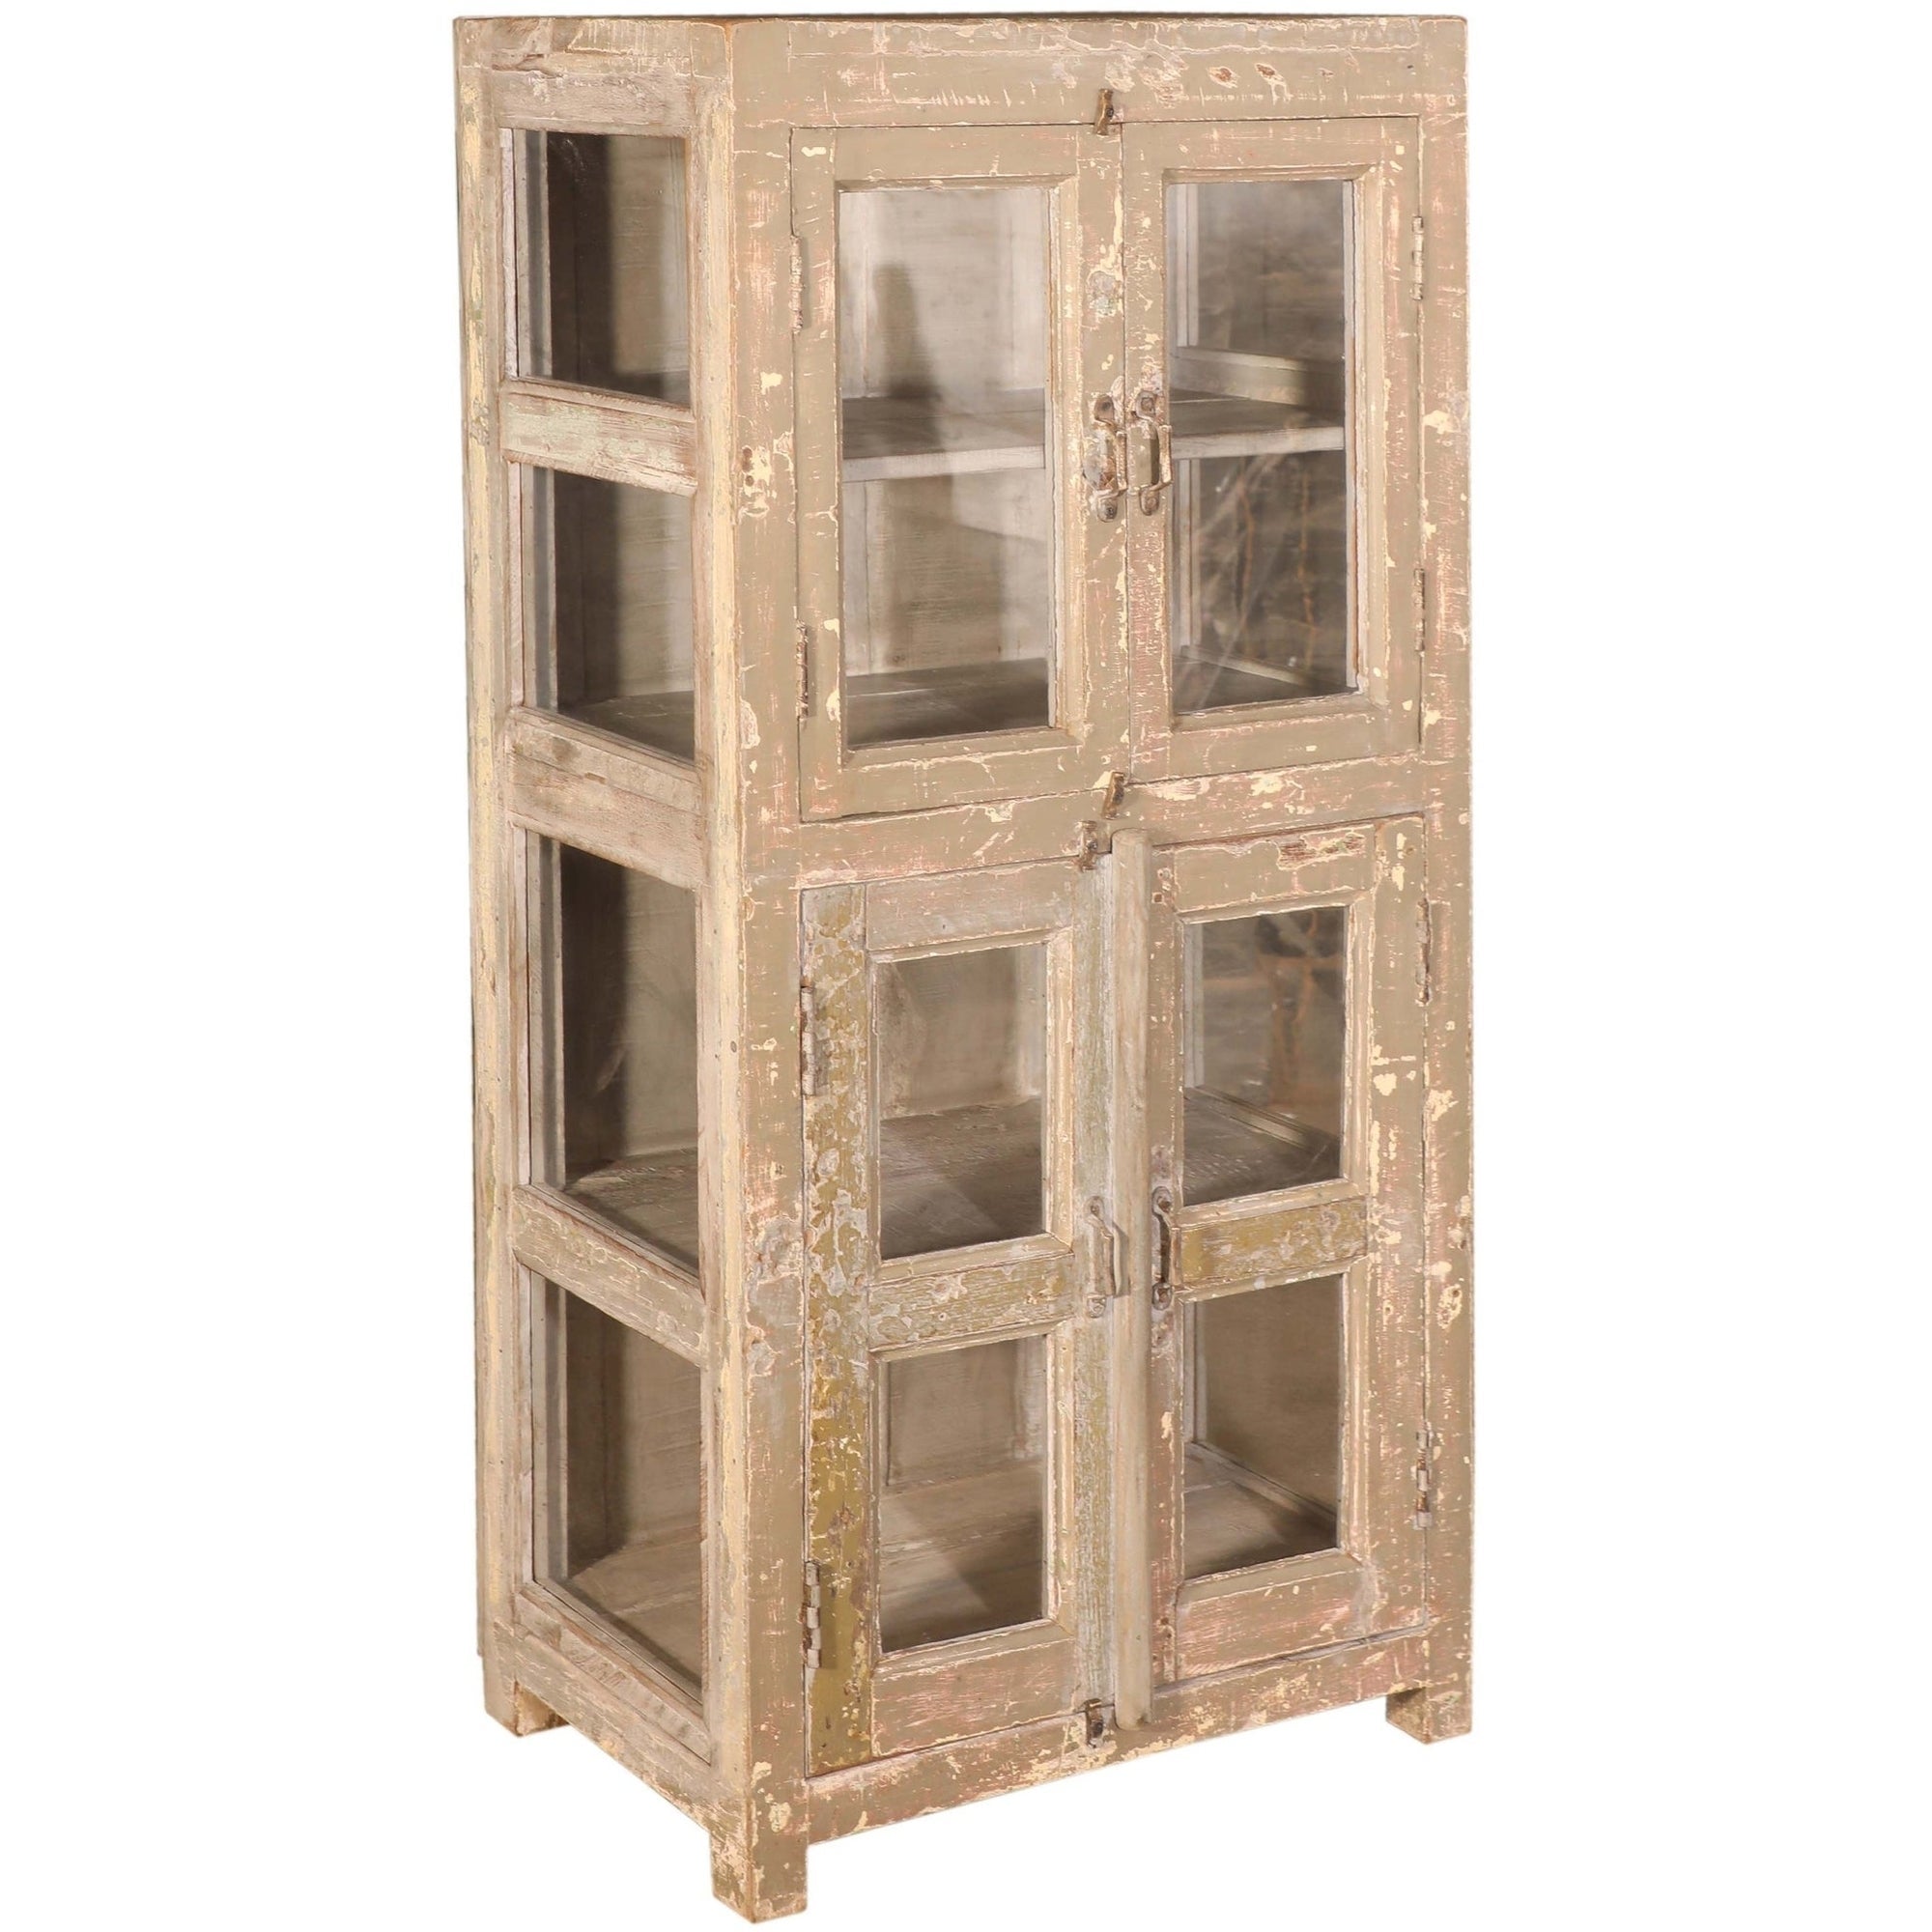 RM-058373, Wooden Cabinet With Glass, Teak, 50+Yrs Old - iDekor8